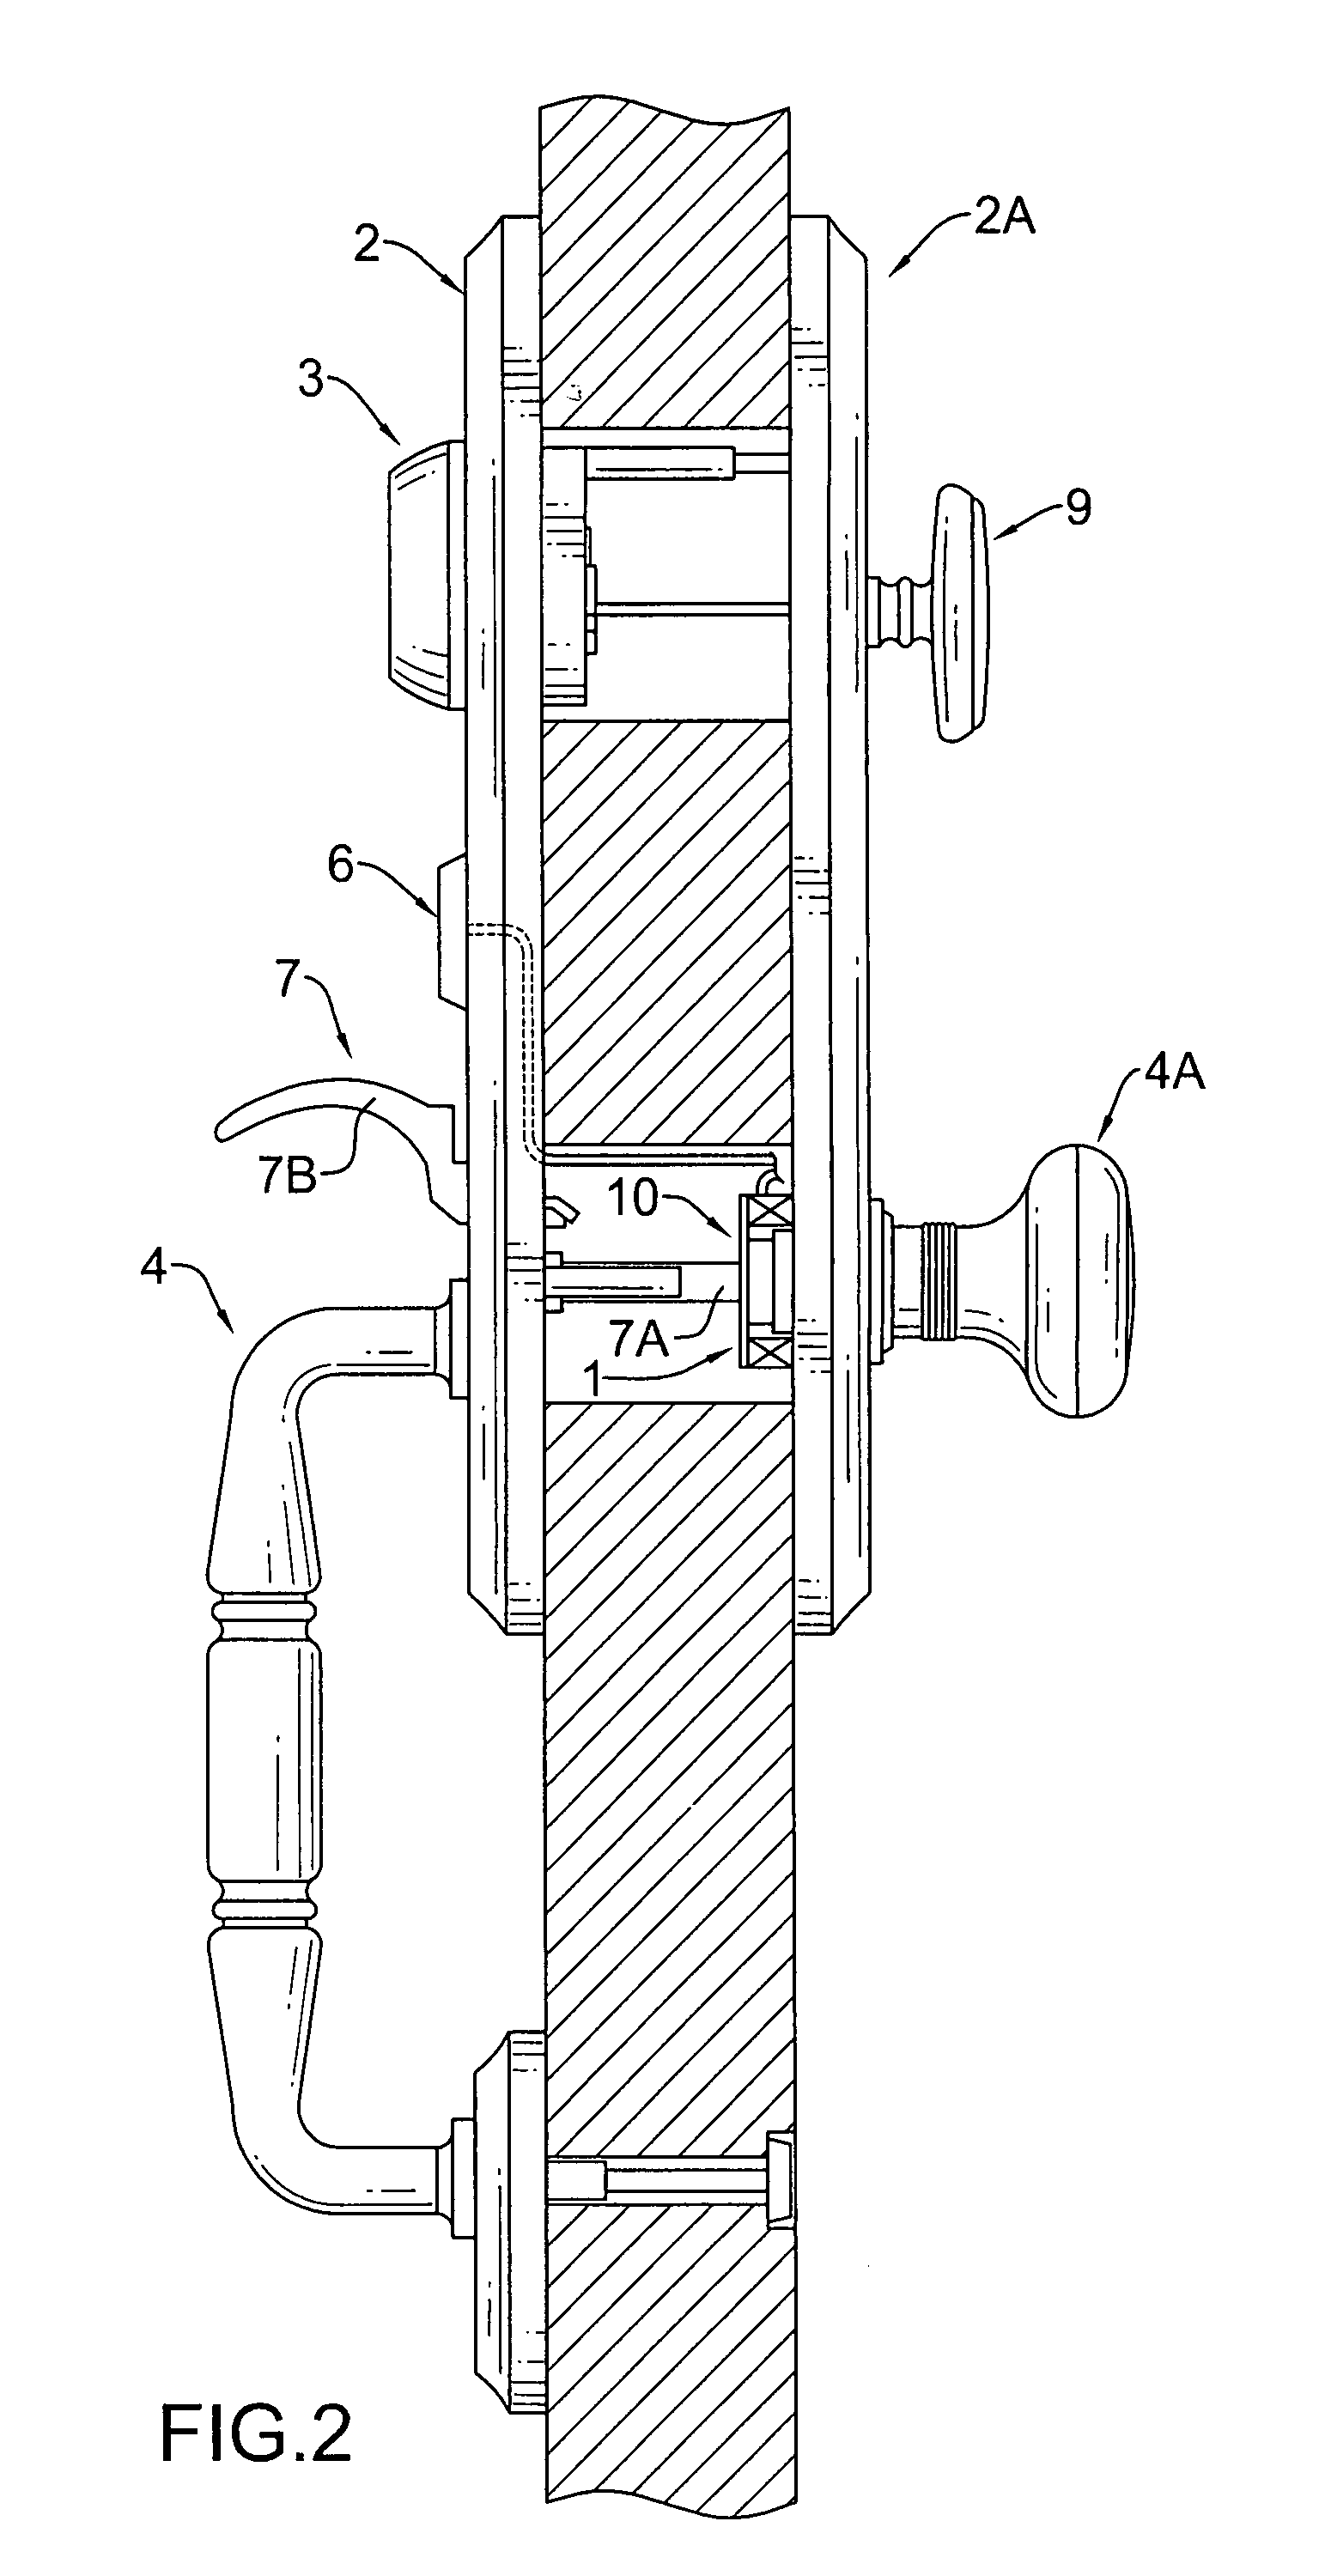 Transmission device for a door lock